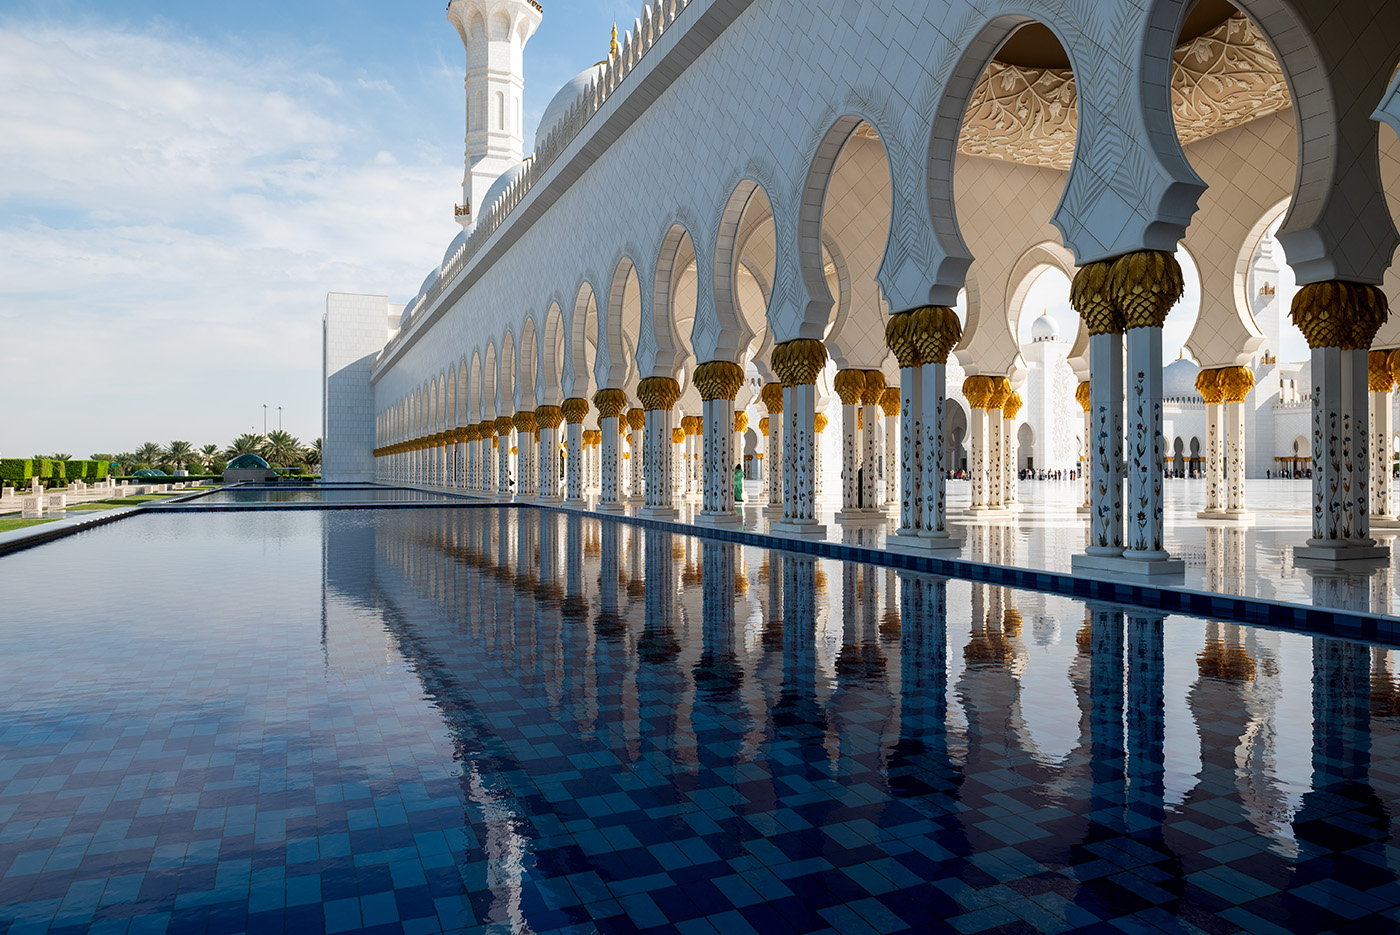 Sheikh Zayed Grand Mosque archway reflecting in the water